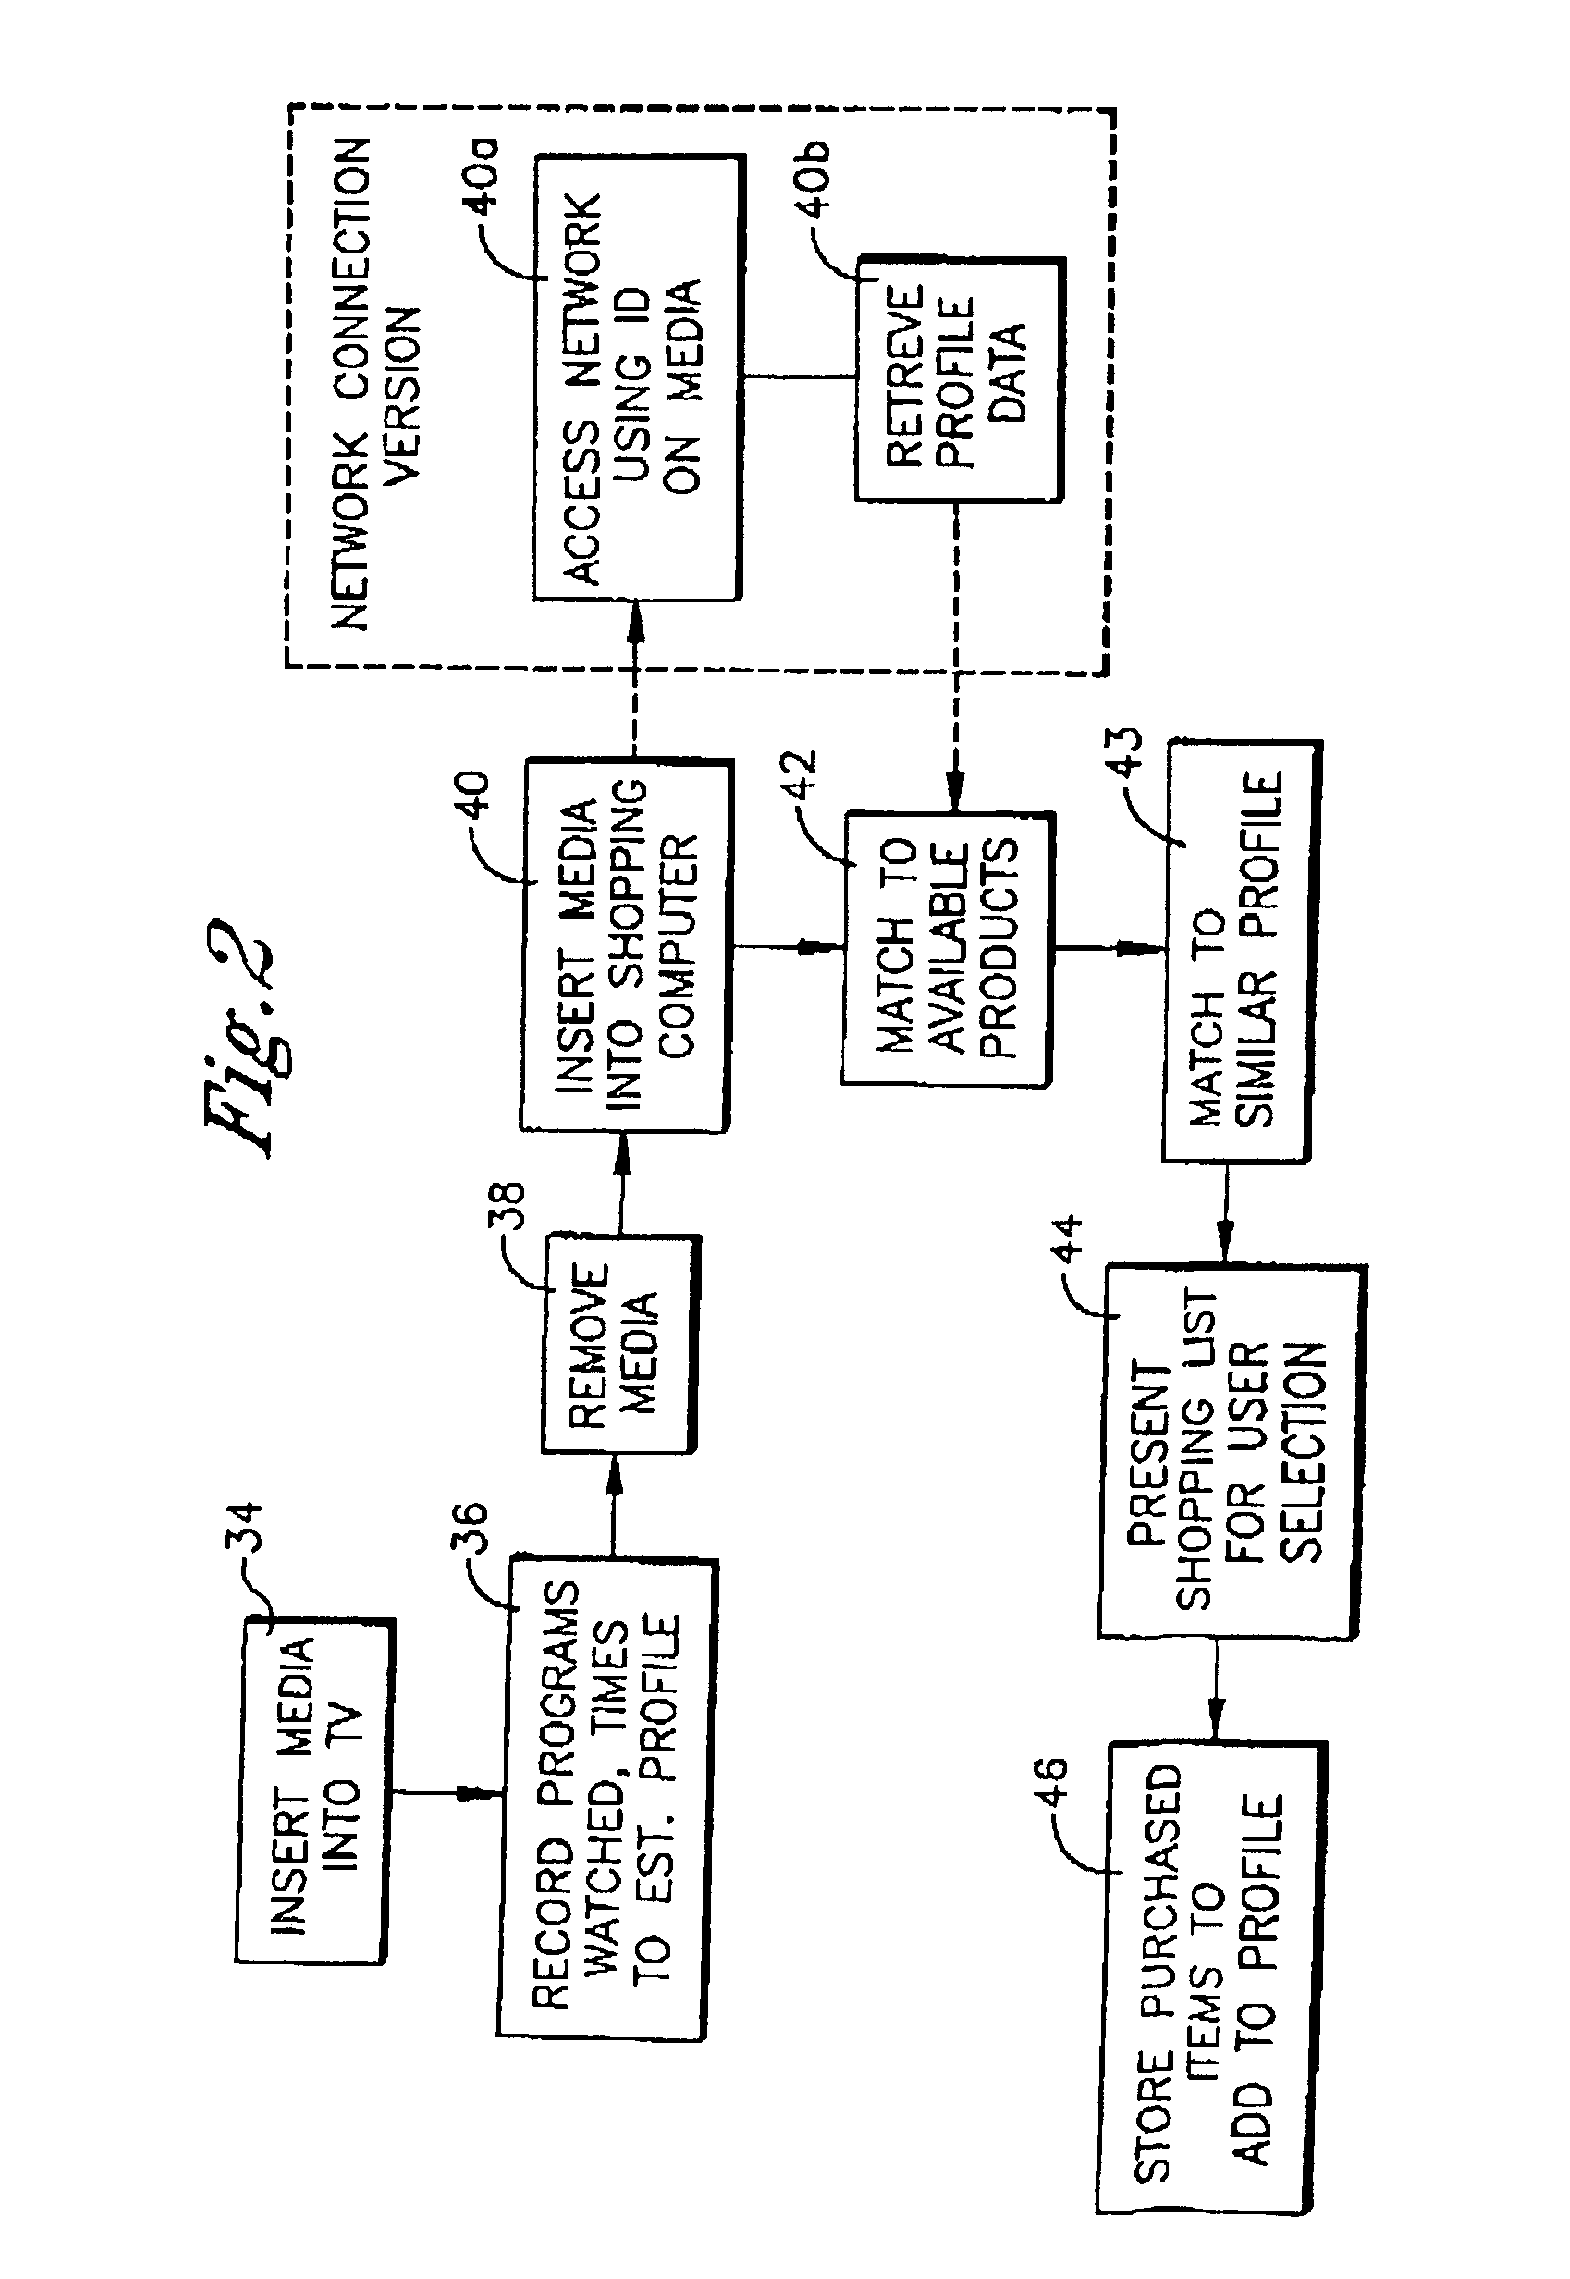 System and method for establishing viewer shopping preferences based on viewing and listening preferences